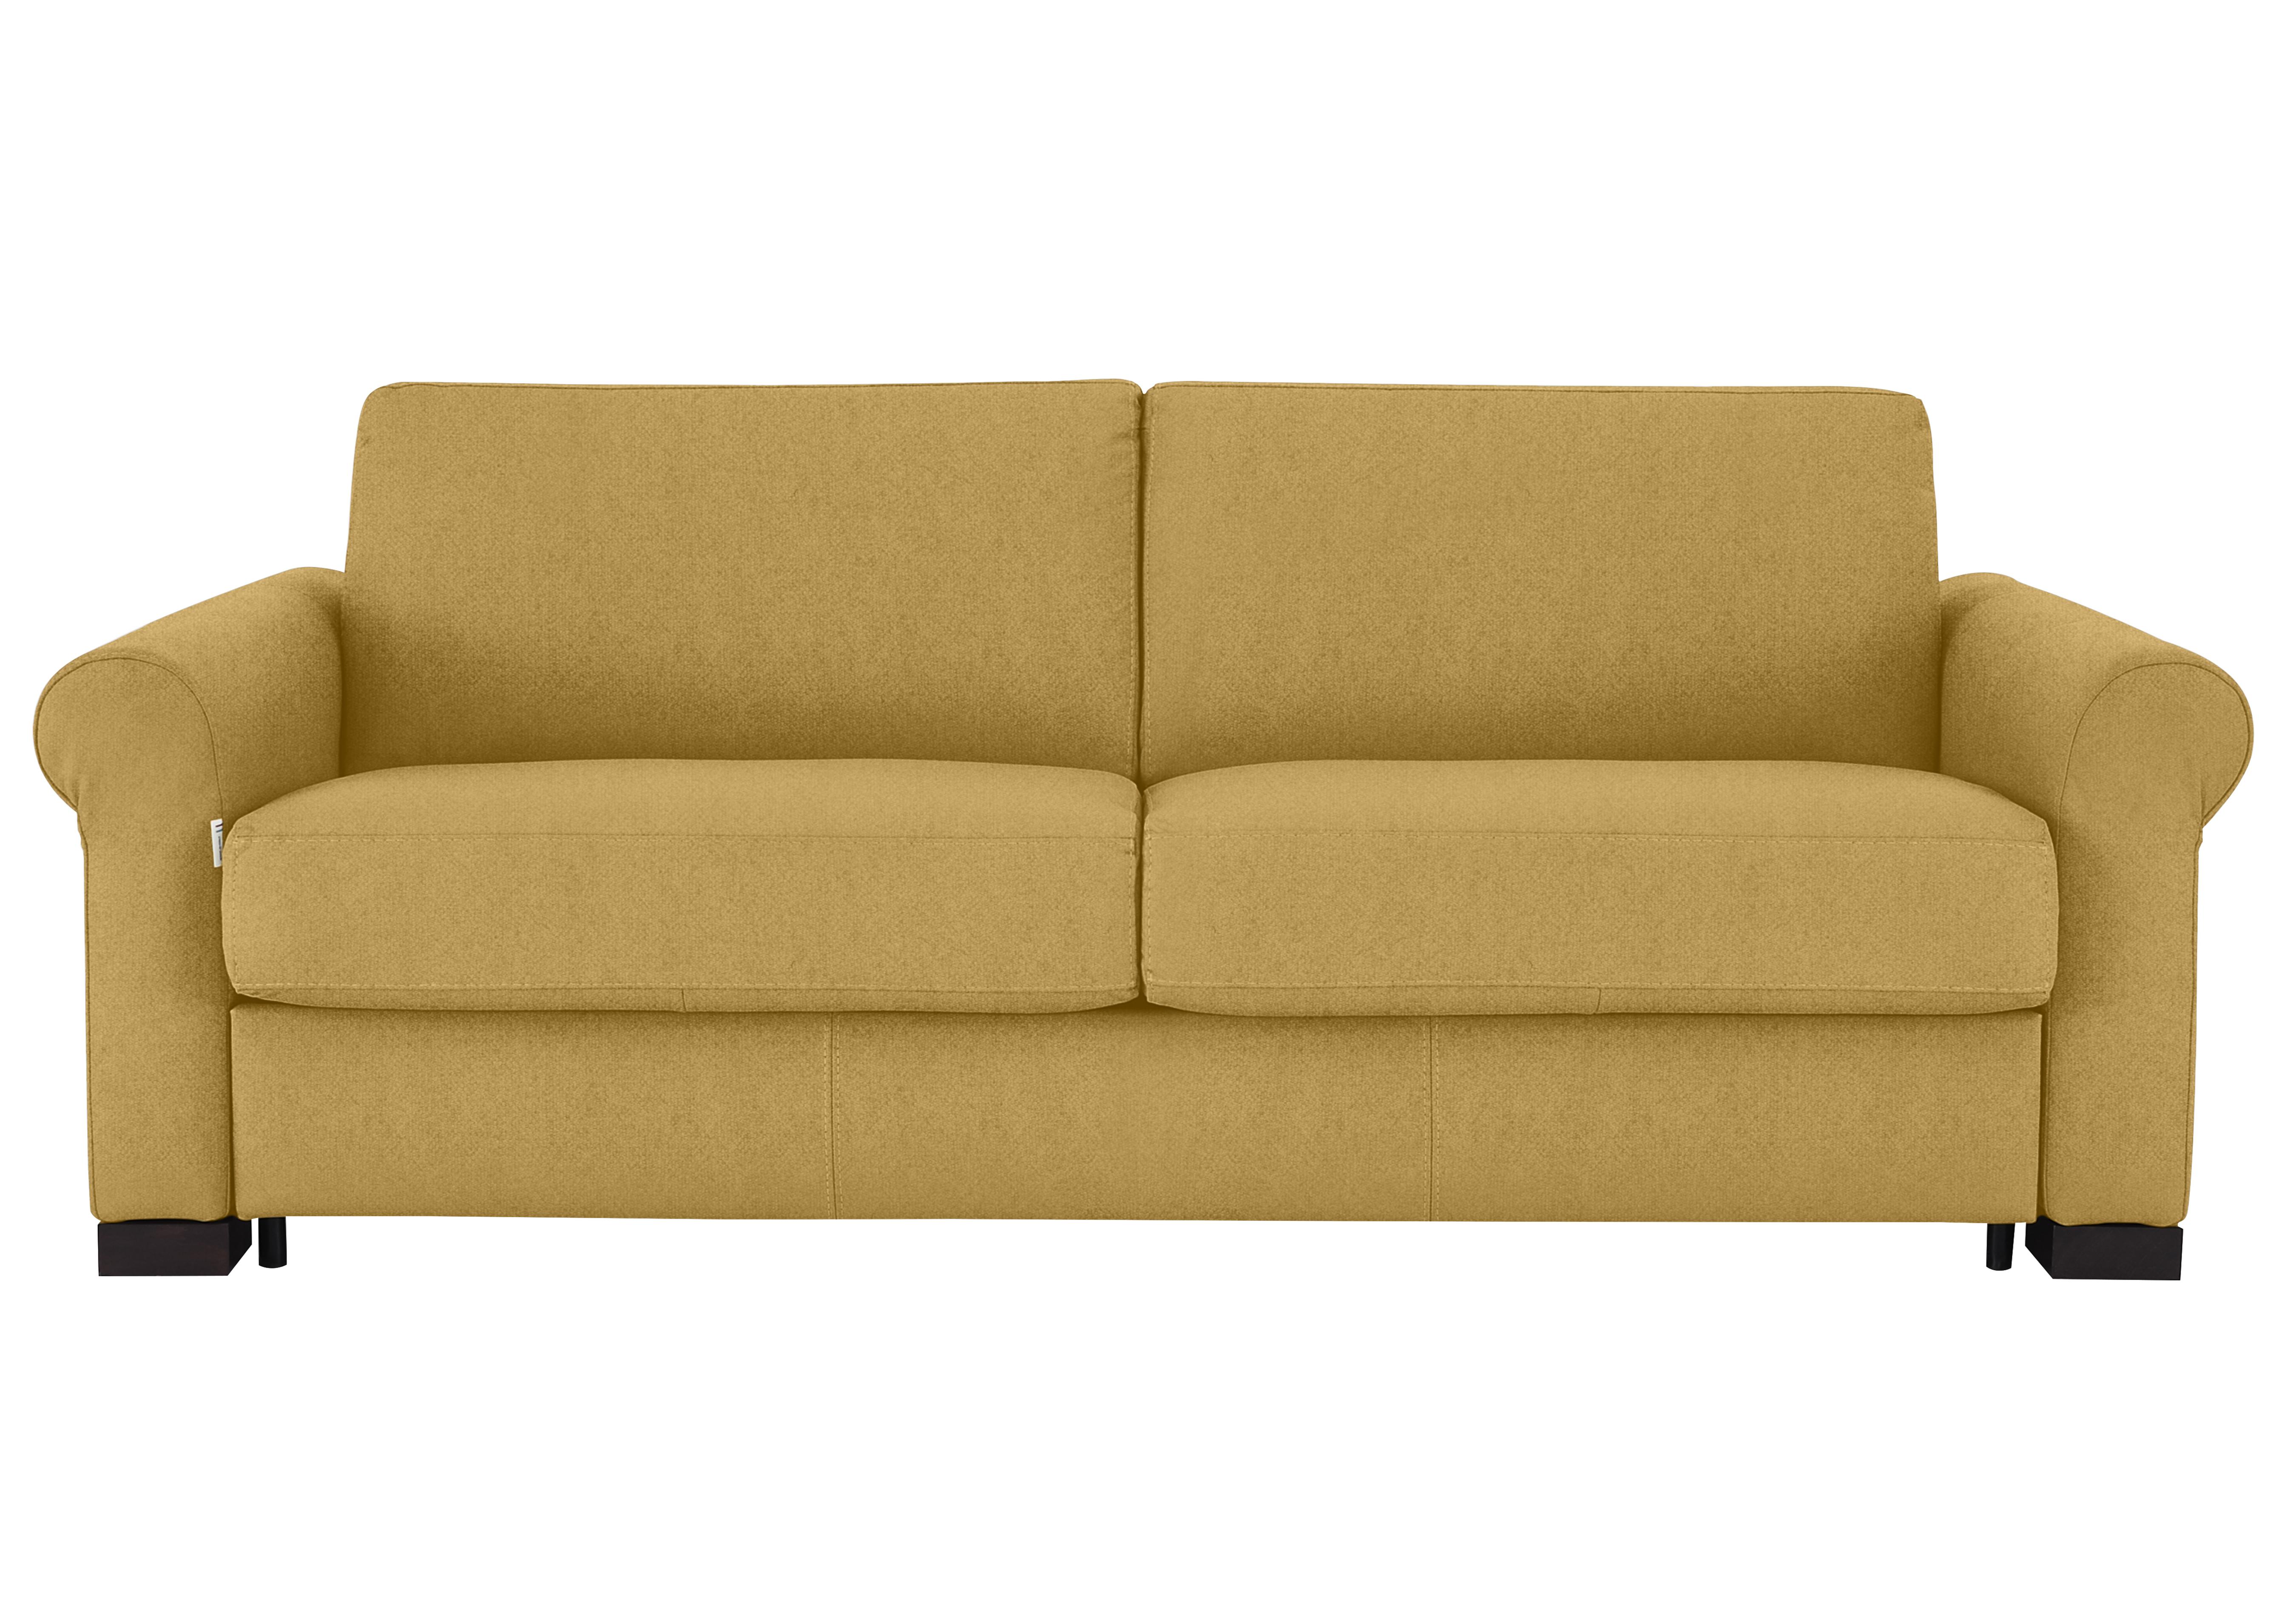 Alcova 3 Seater Fabric Sofa Bed with Scroll Arms in Fuente Mostaza on Furniture Village